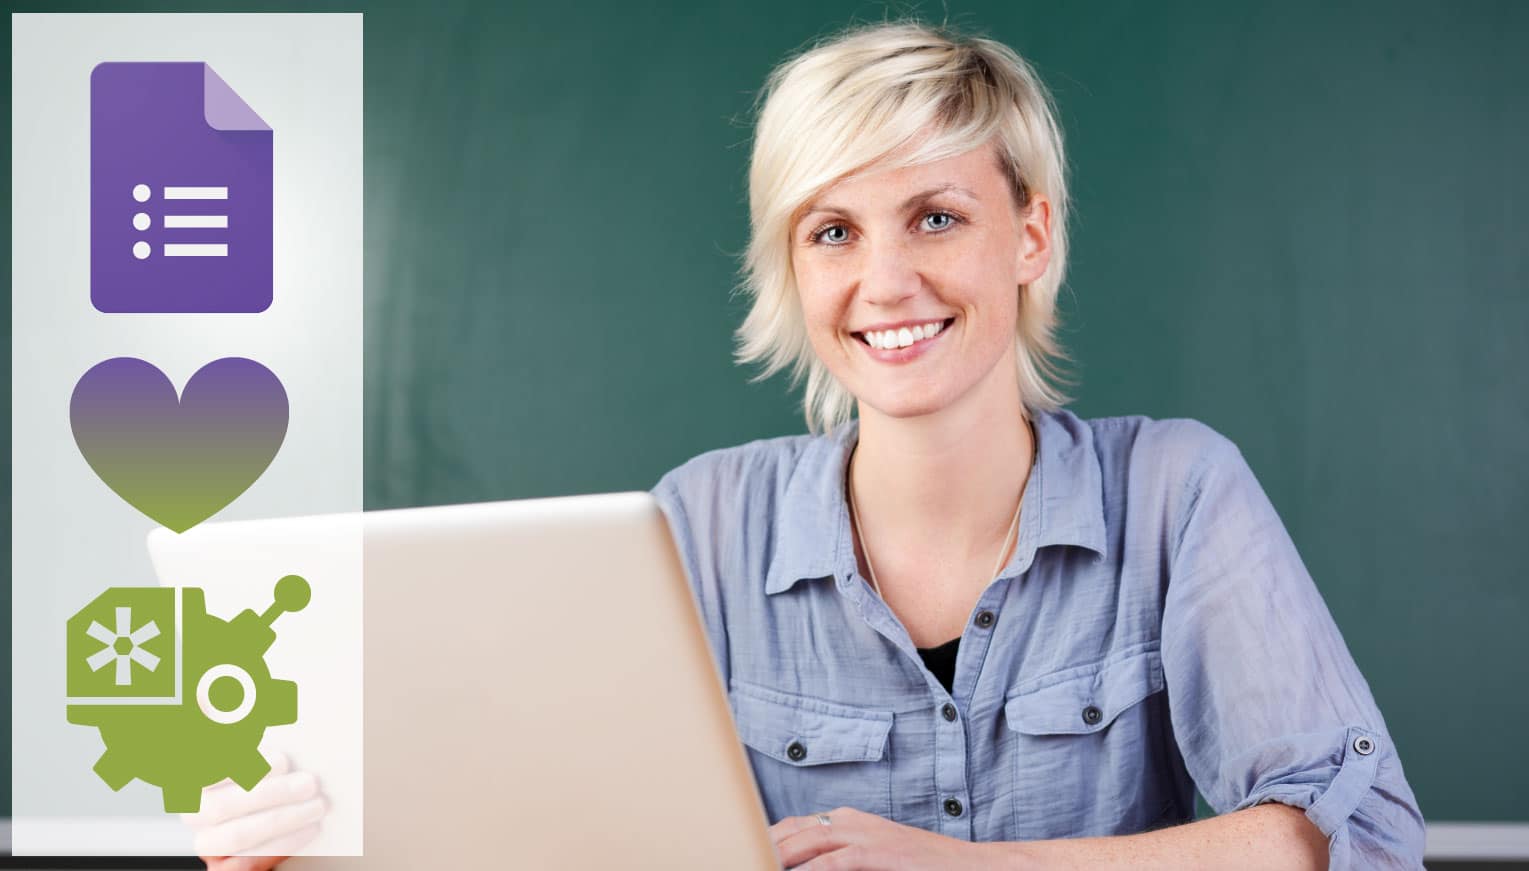 Google Forms icon, heart icon, and Quizbot icon with a woman in a blue shirt, smiling while using a laptop